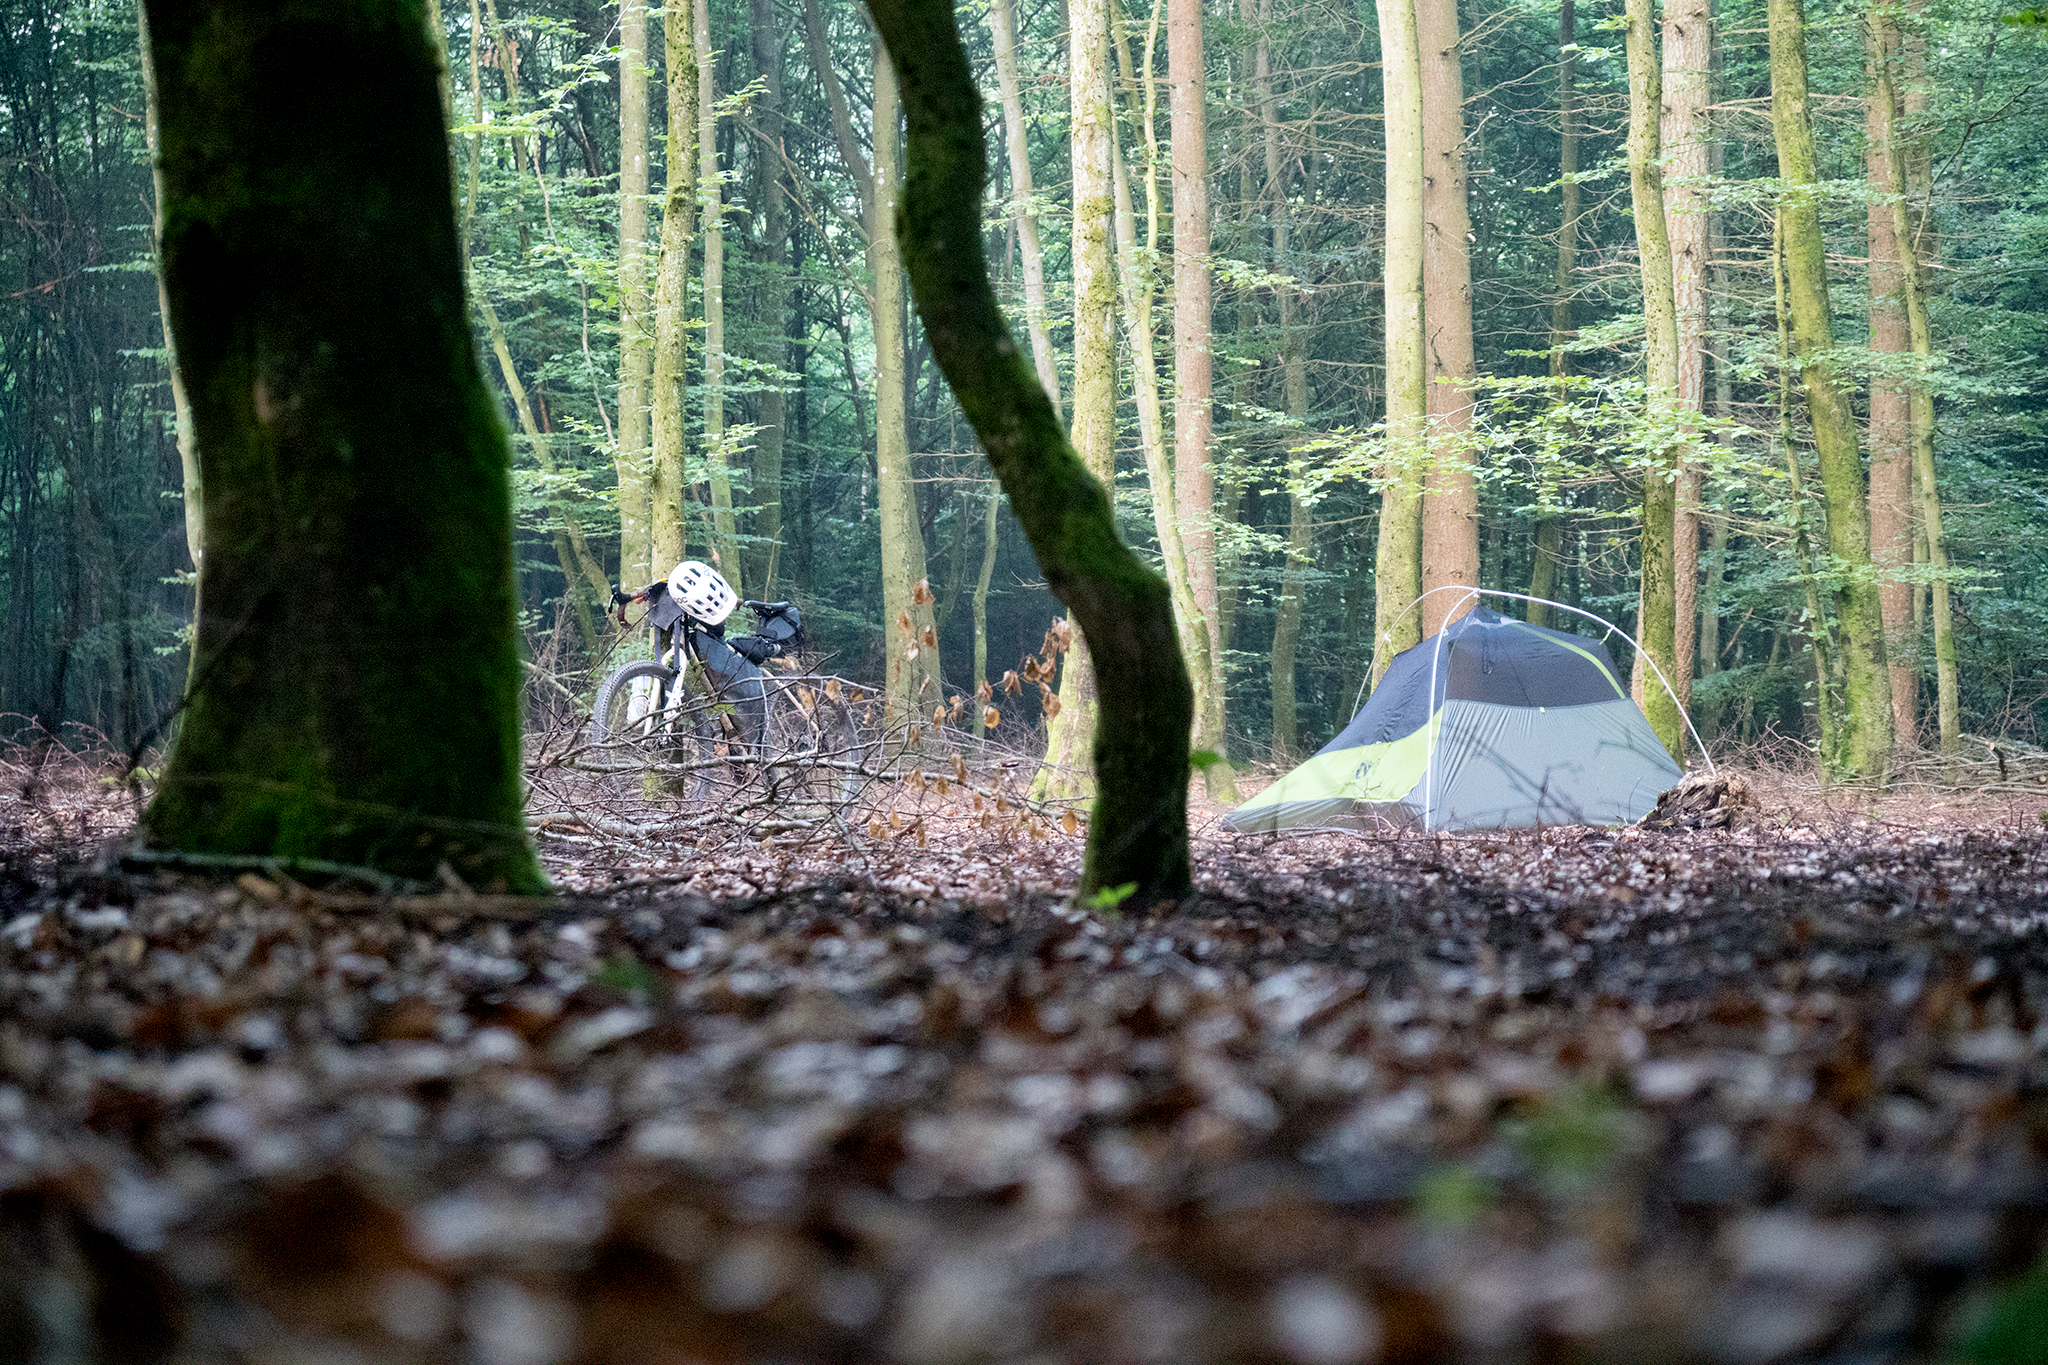  Summer in Belgium means a sun that sets late. By 11 pm, as I’m setting up camp amongst the leaf litter, it gets dark enough that the birds have begun to go quiet. The forest is eerily silent. Occasionally, a breeze nudges the towering beech trees en